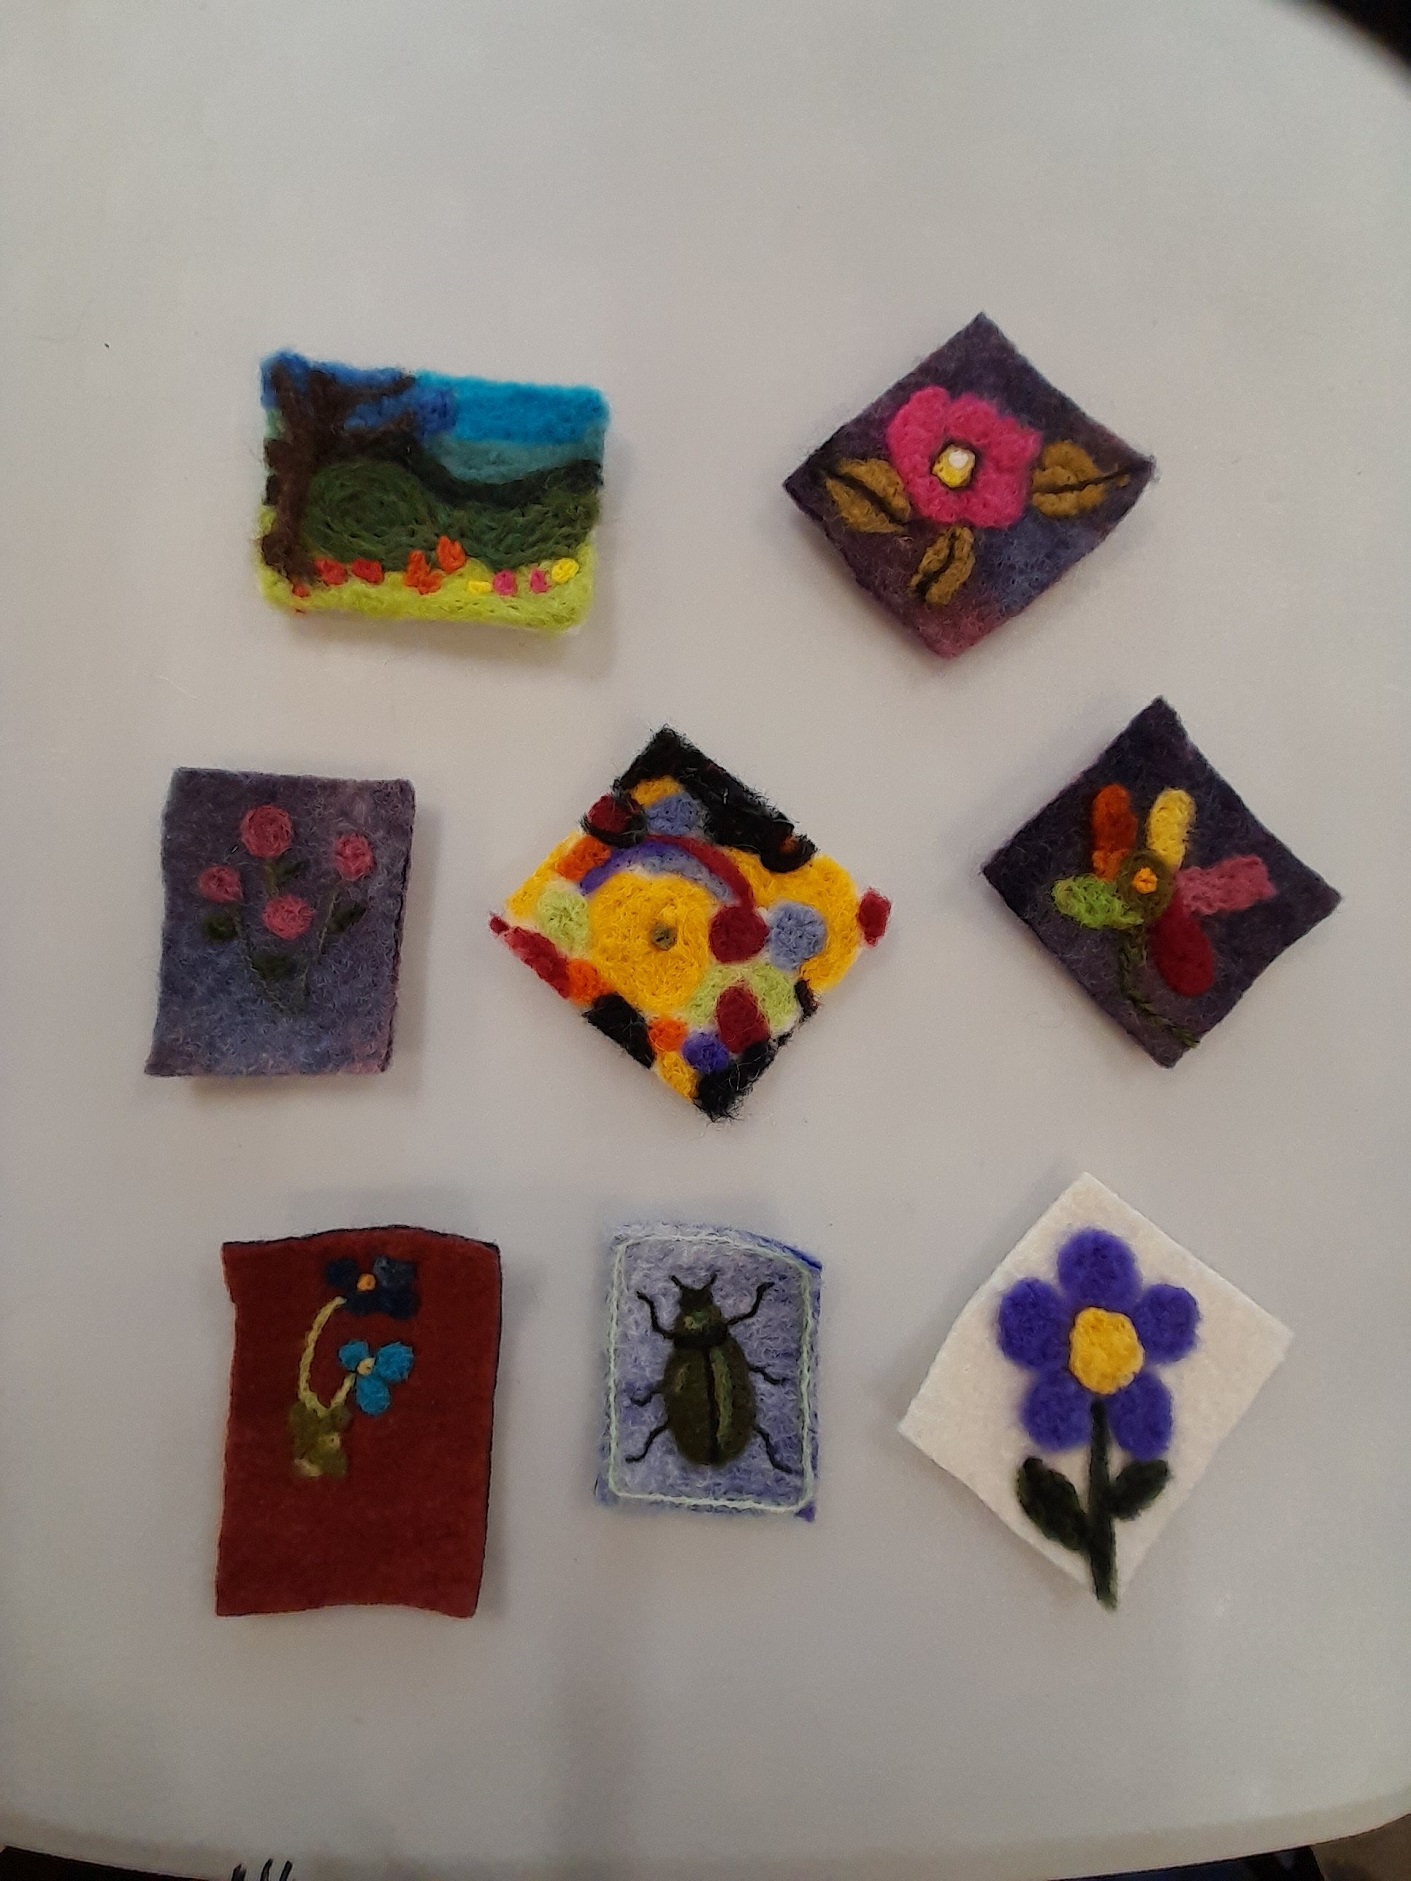 Waimate Creative Fibre members learned how to needle felt at their last meeting. Photo: supplied